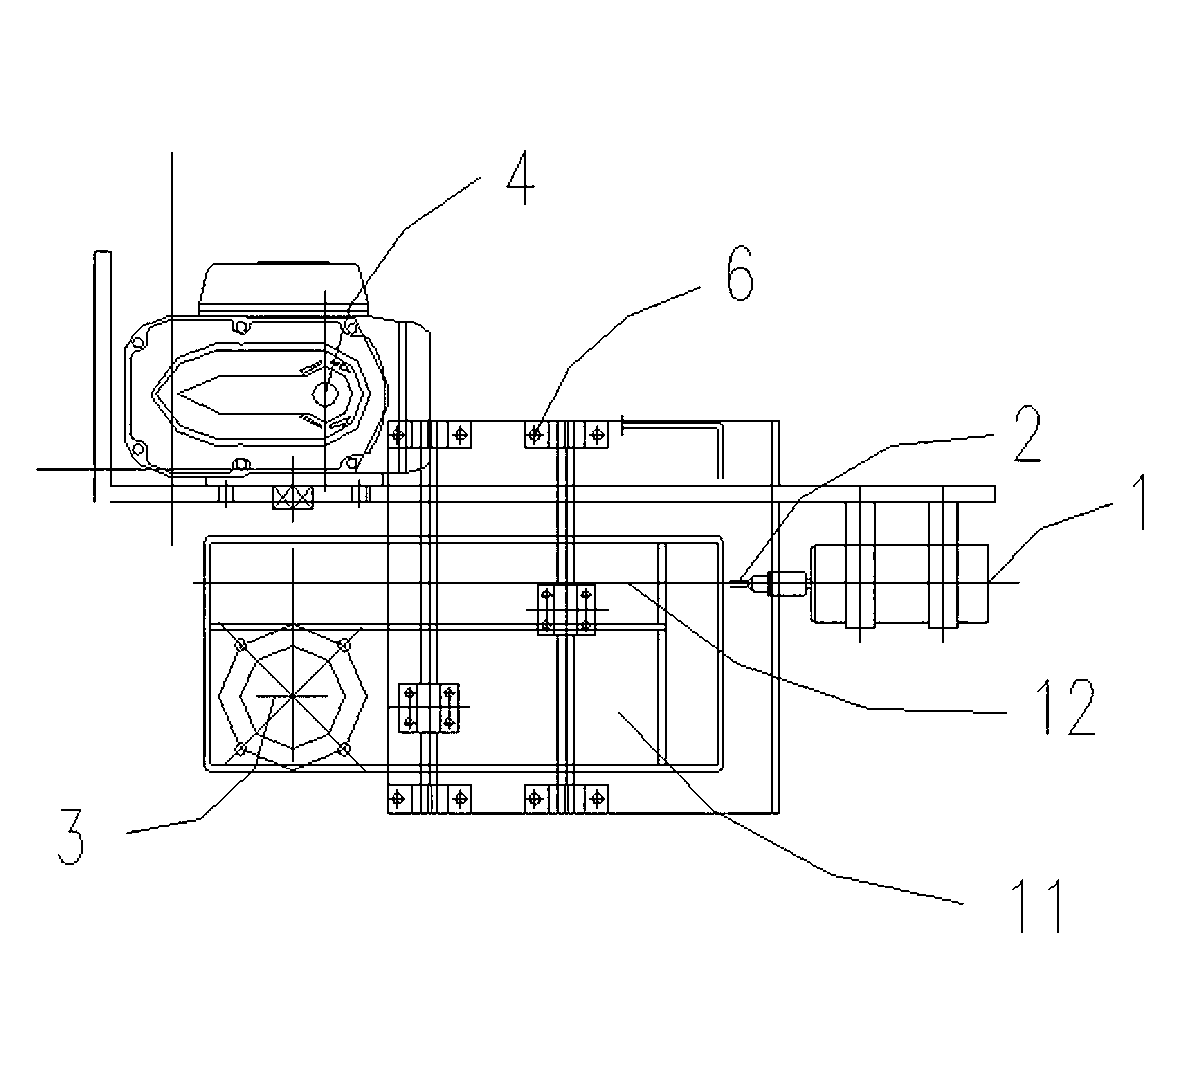 Apparatus capable of on-line continuous monitoring of pH value of water sample and automatic cleaning of electrode